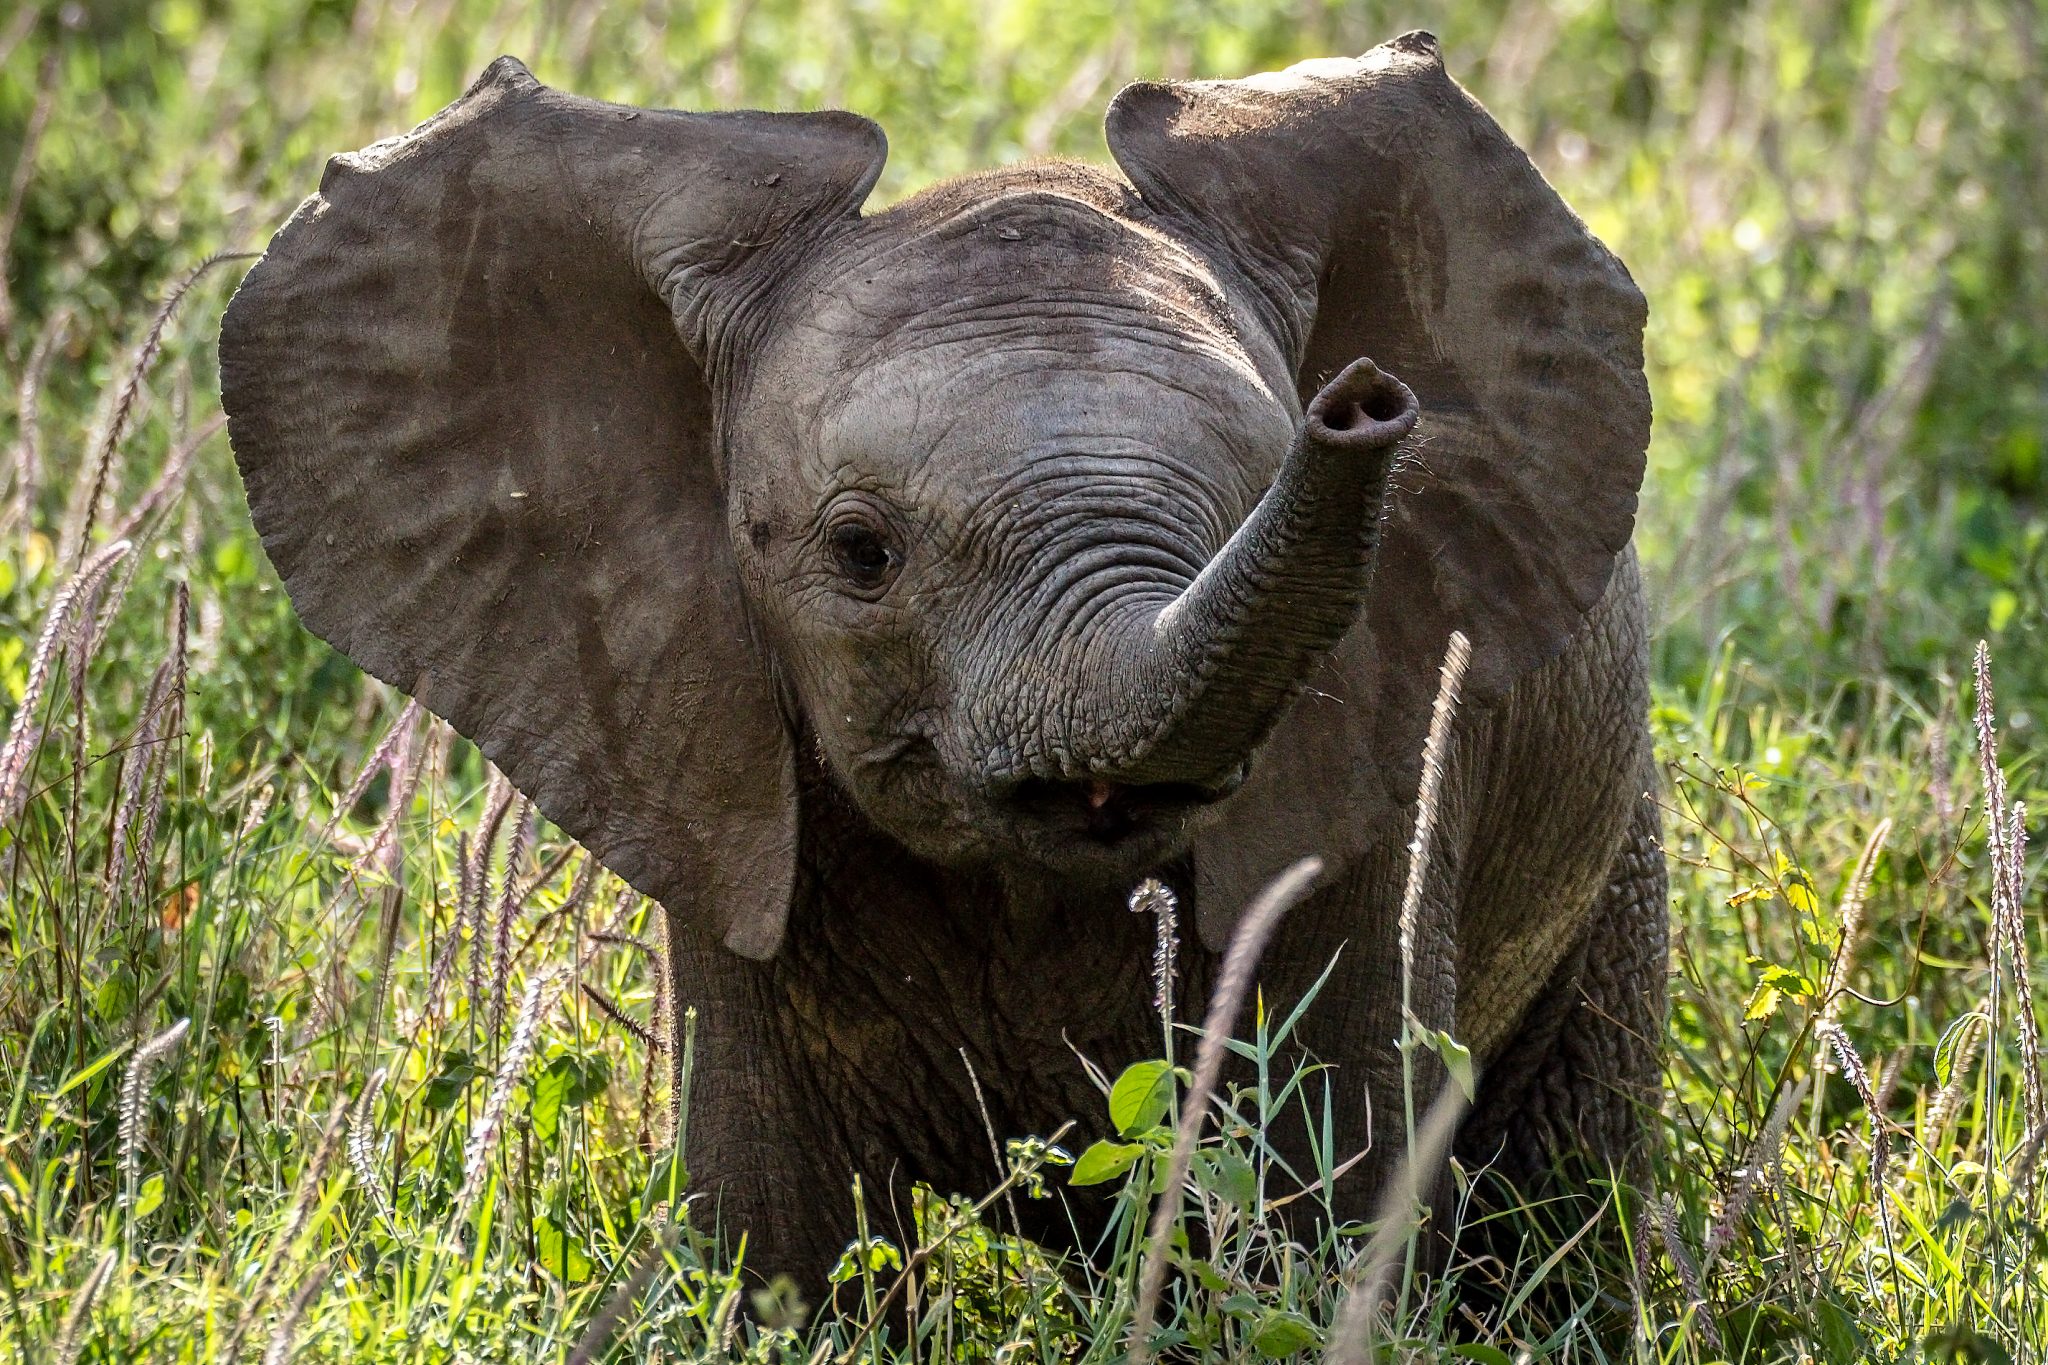 An elephant baby with its trunk turned towards its mouth